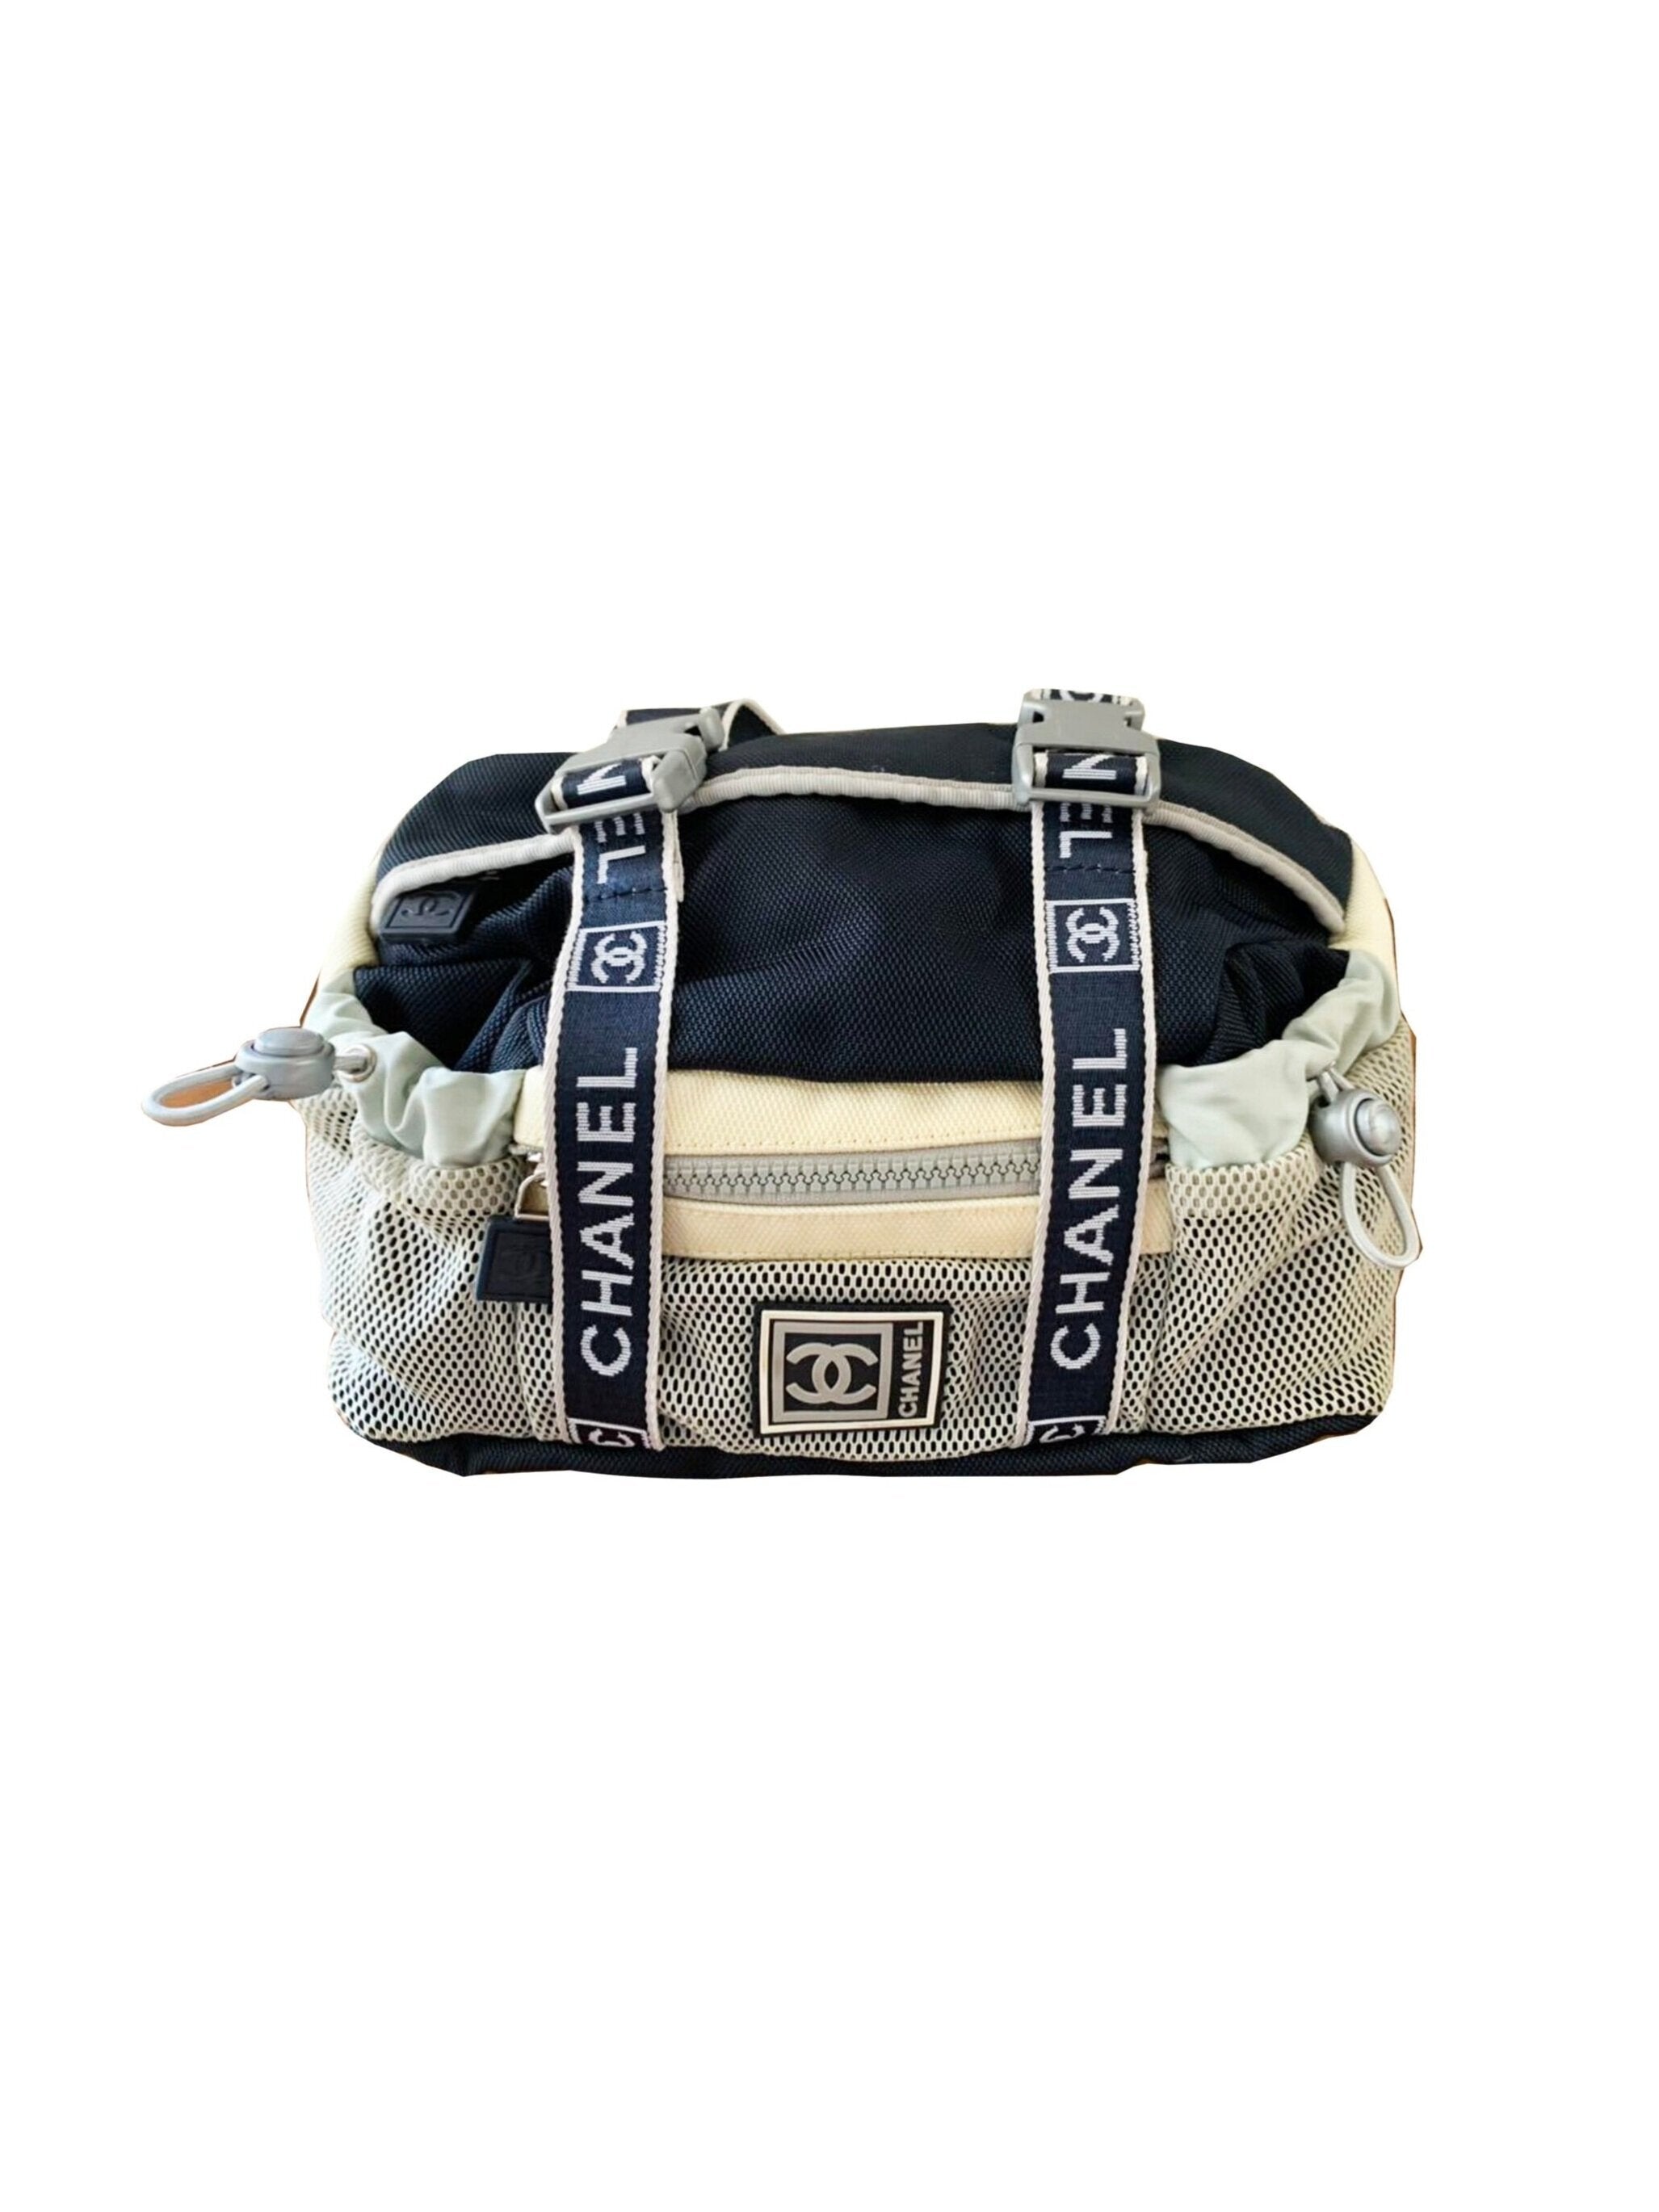 Chanel Sports Shoulder Bags for Women